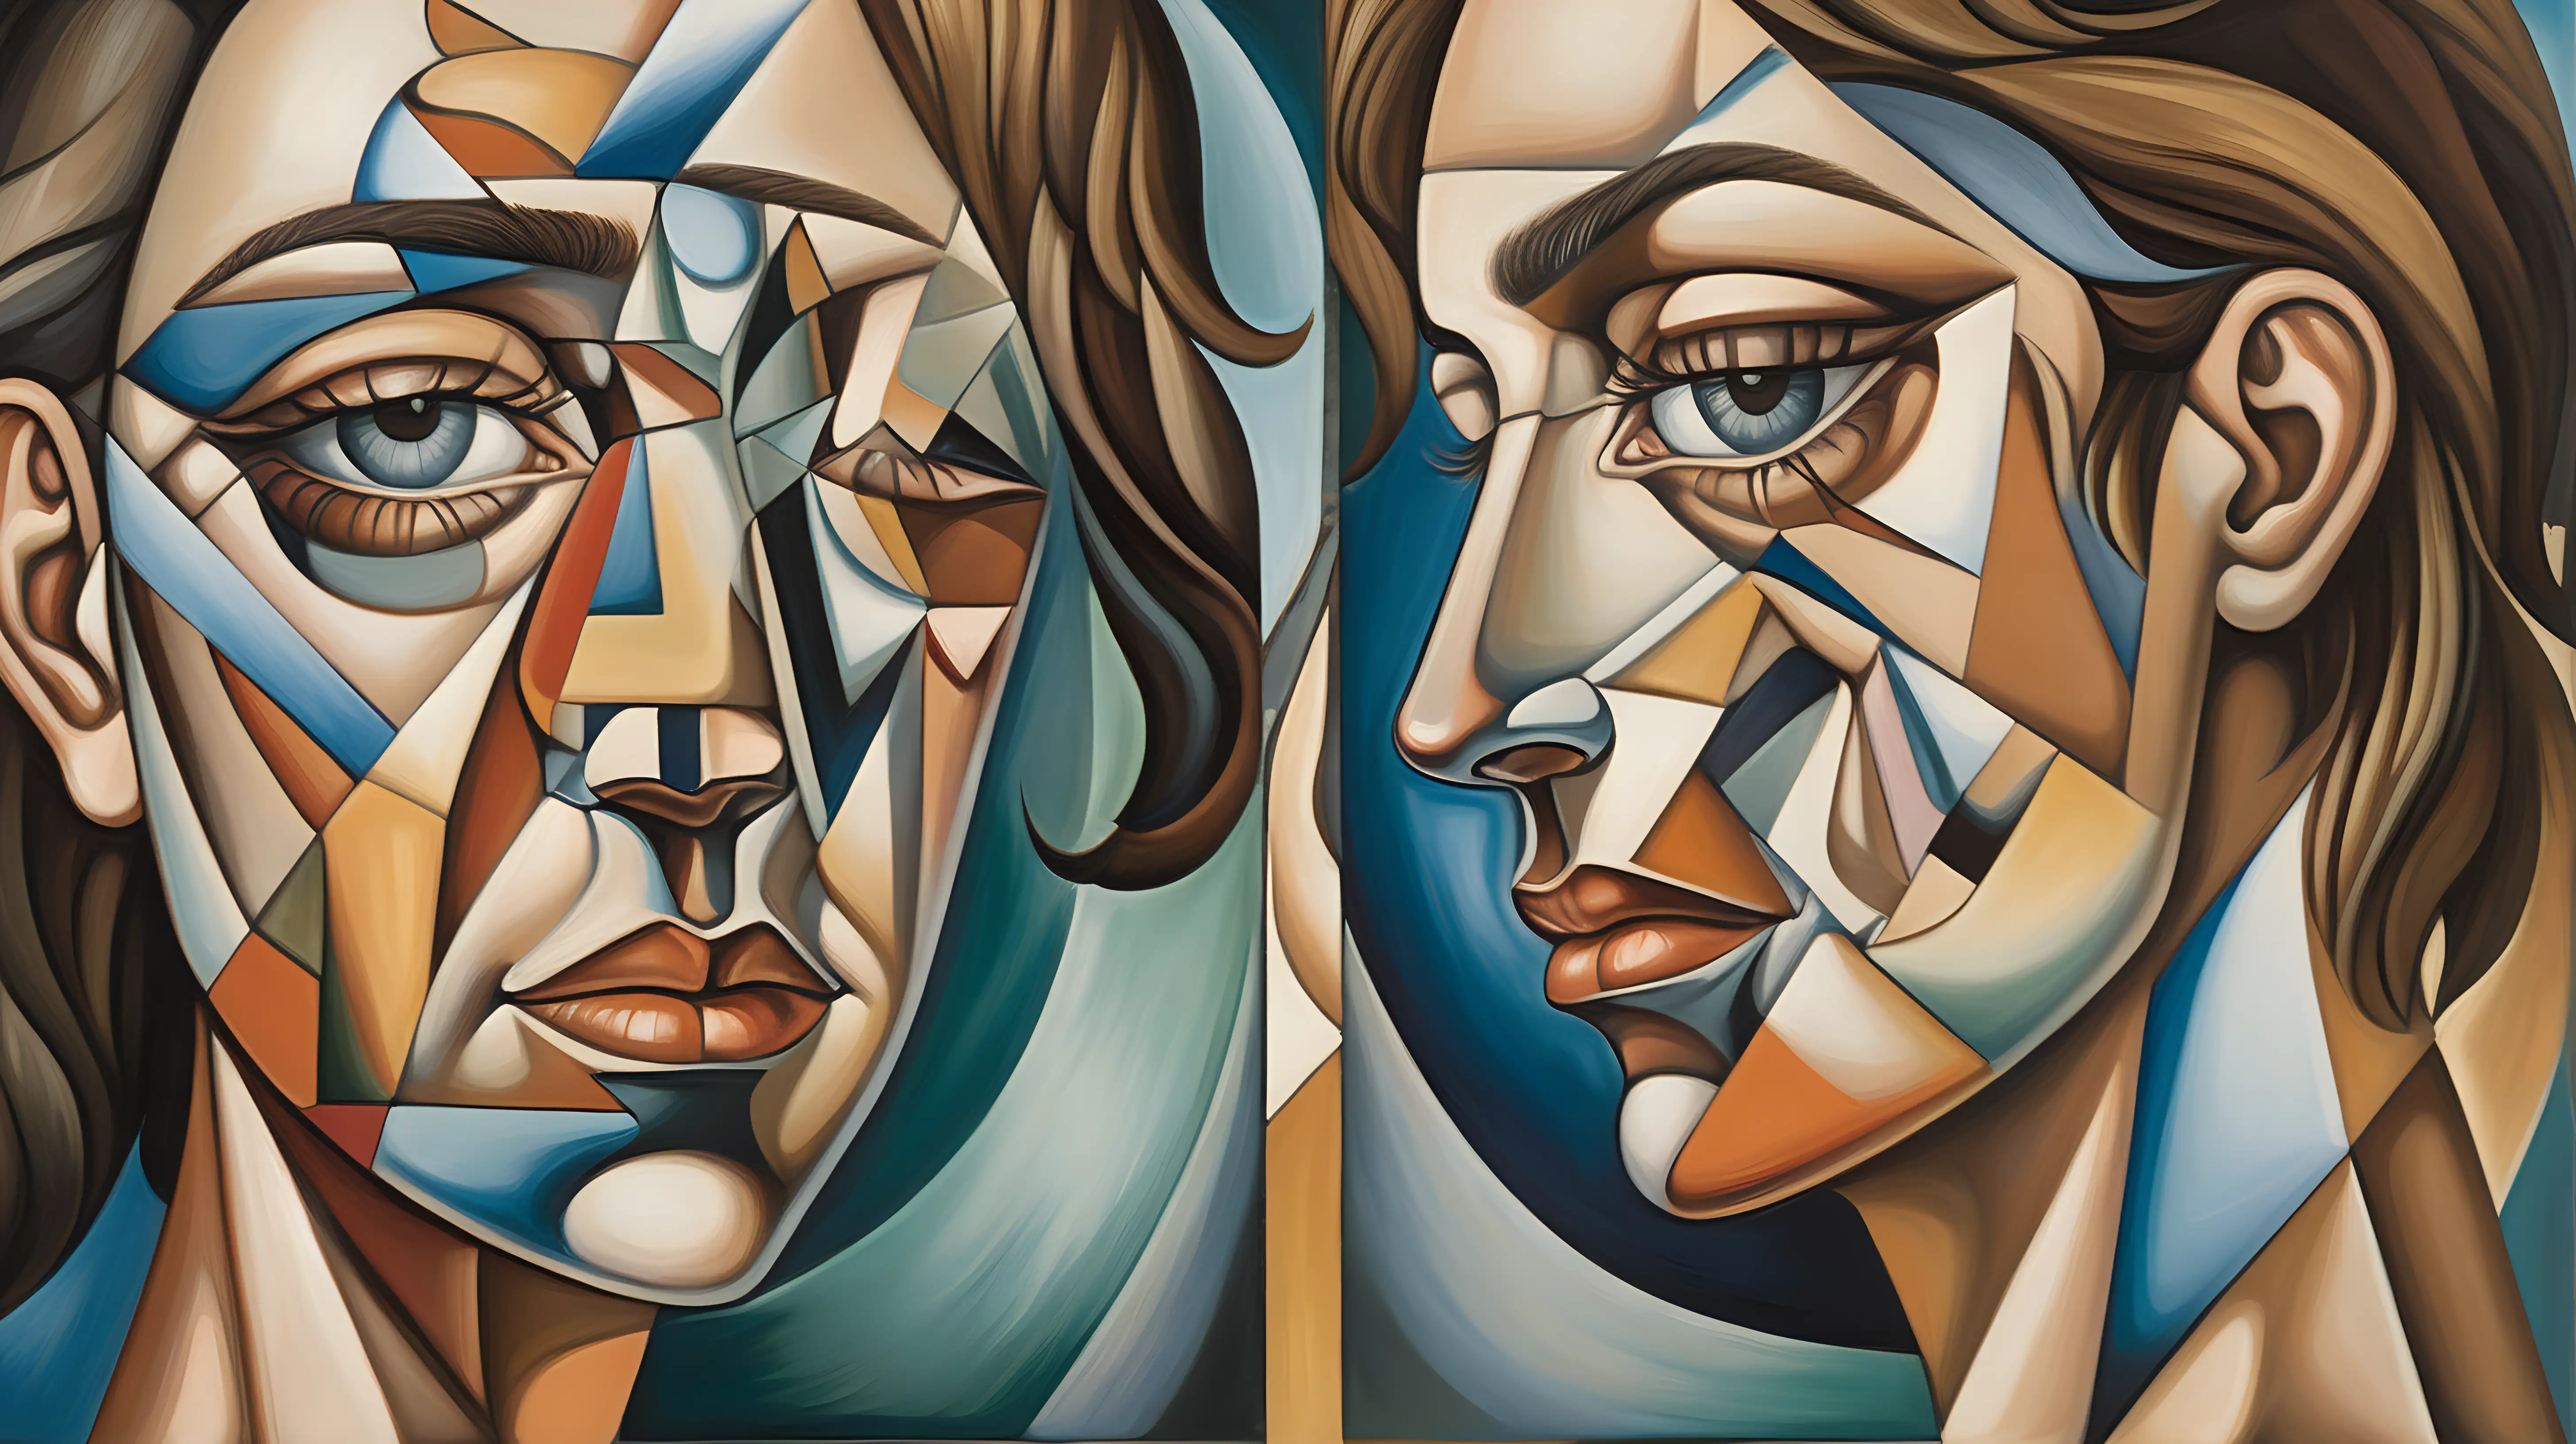 Cubist Dream Reflections: Reflect on the nature of identity and self-discovery through a series of Cubist self-portraits, where fractured images and distorted features reveal the complexity of the human psyche.